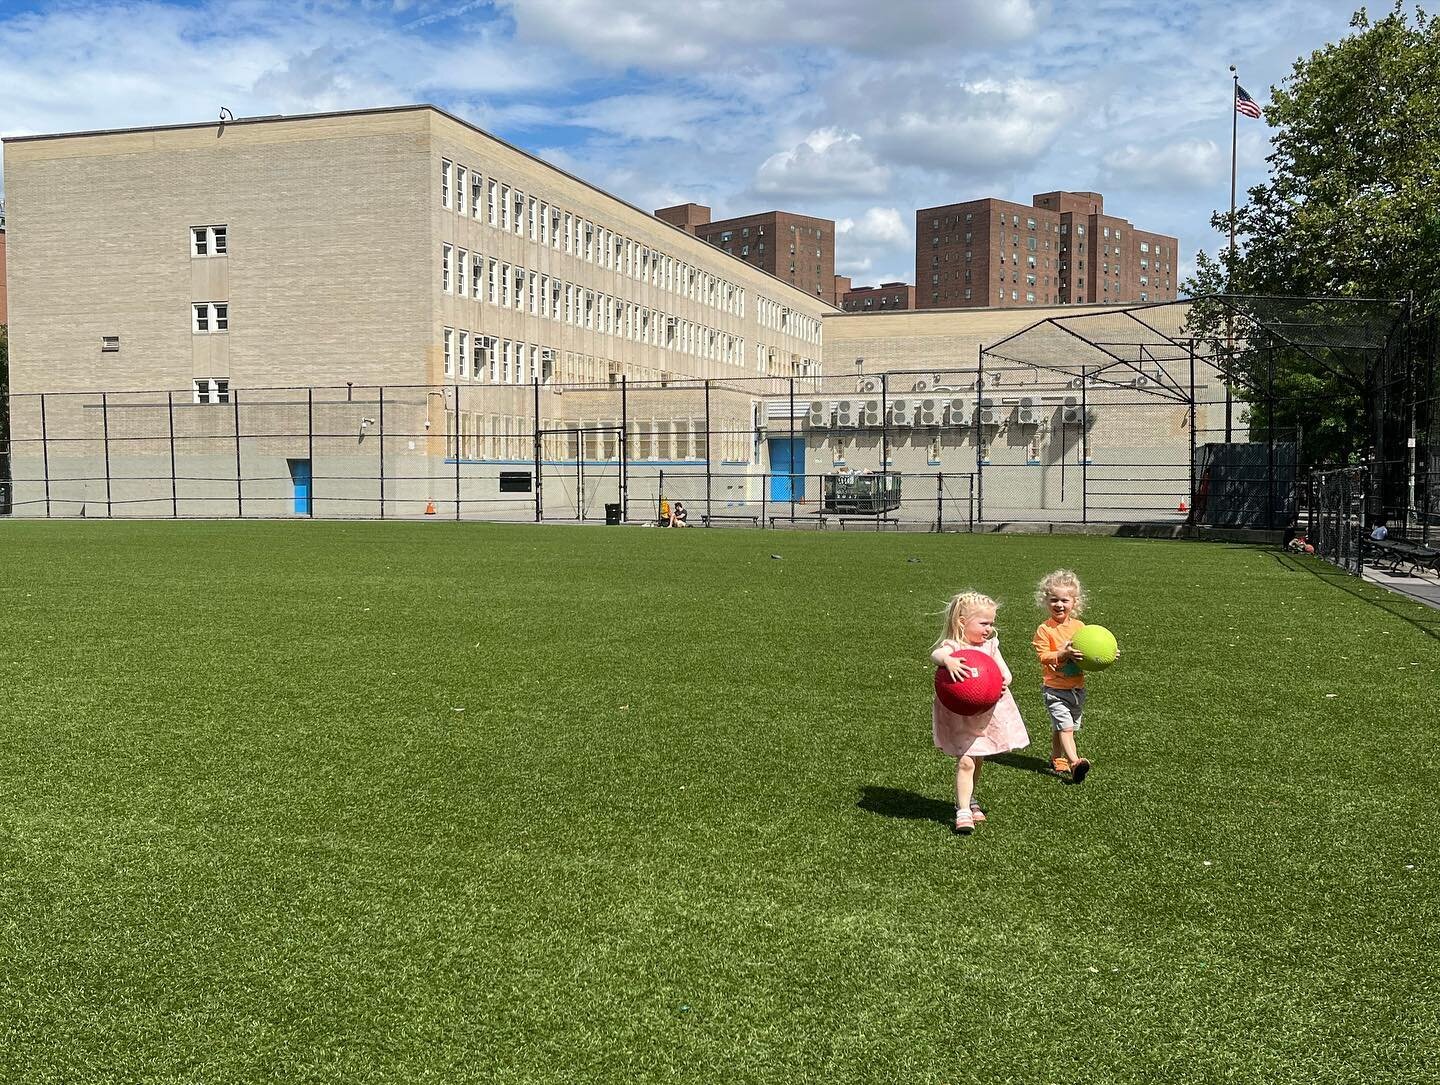 There&rsquo;s nothing better than exploring the city&rsquo;s parks for some gross motor play during summer camp! #pota #preschoolofthearts #reggio #reggiopreschool #preschoolinspiration #earlychildhoodeducation #earlylearning #camp #sota #summerofthe